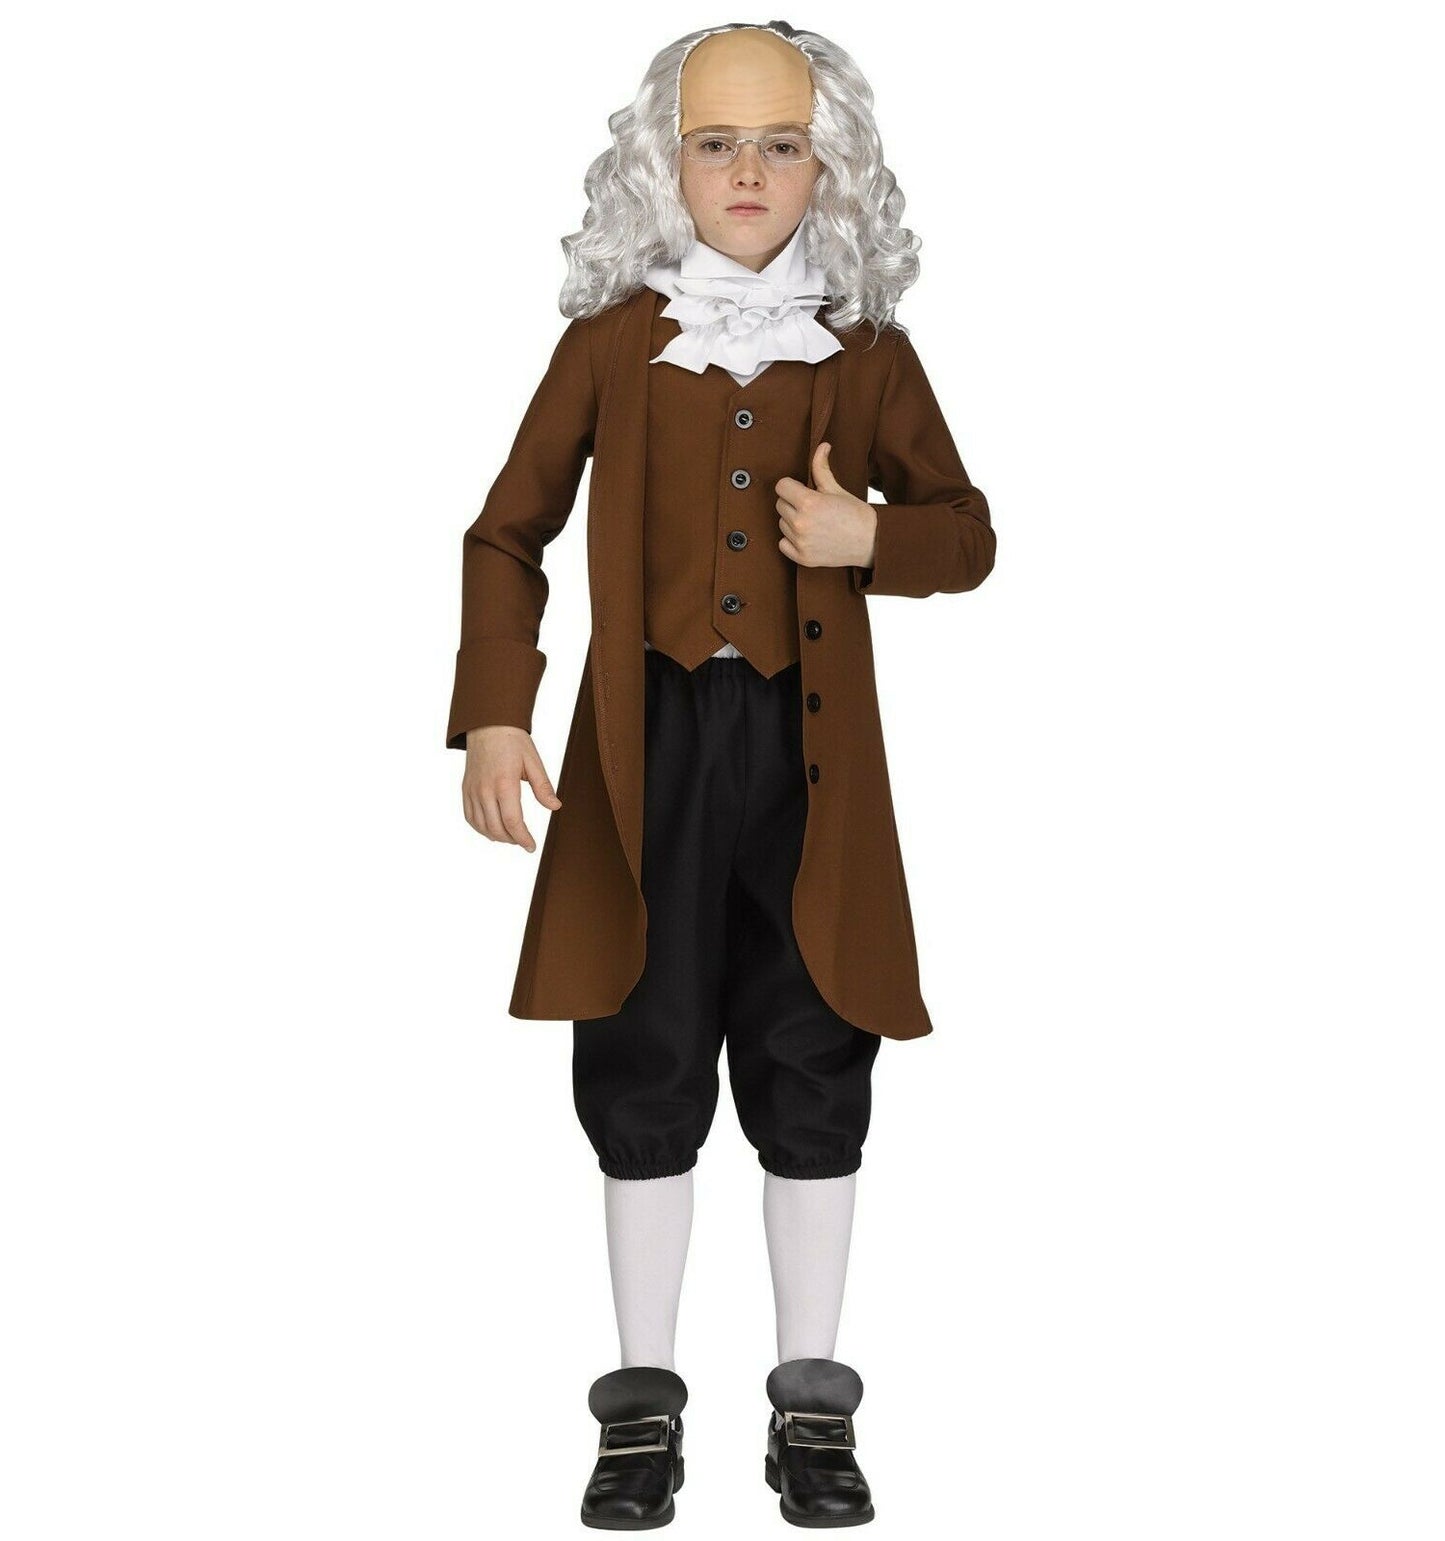 Benjamin Ben Franklin Historical Child Costume Jacket with attached vest front Jabot Knickers Shoe buckles